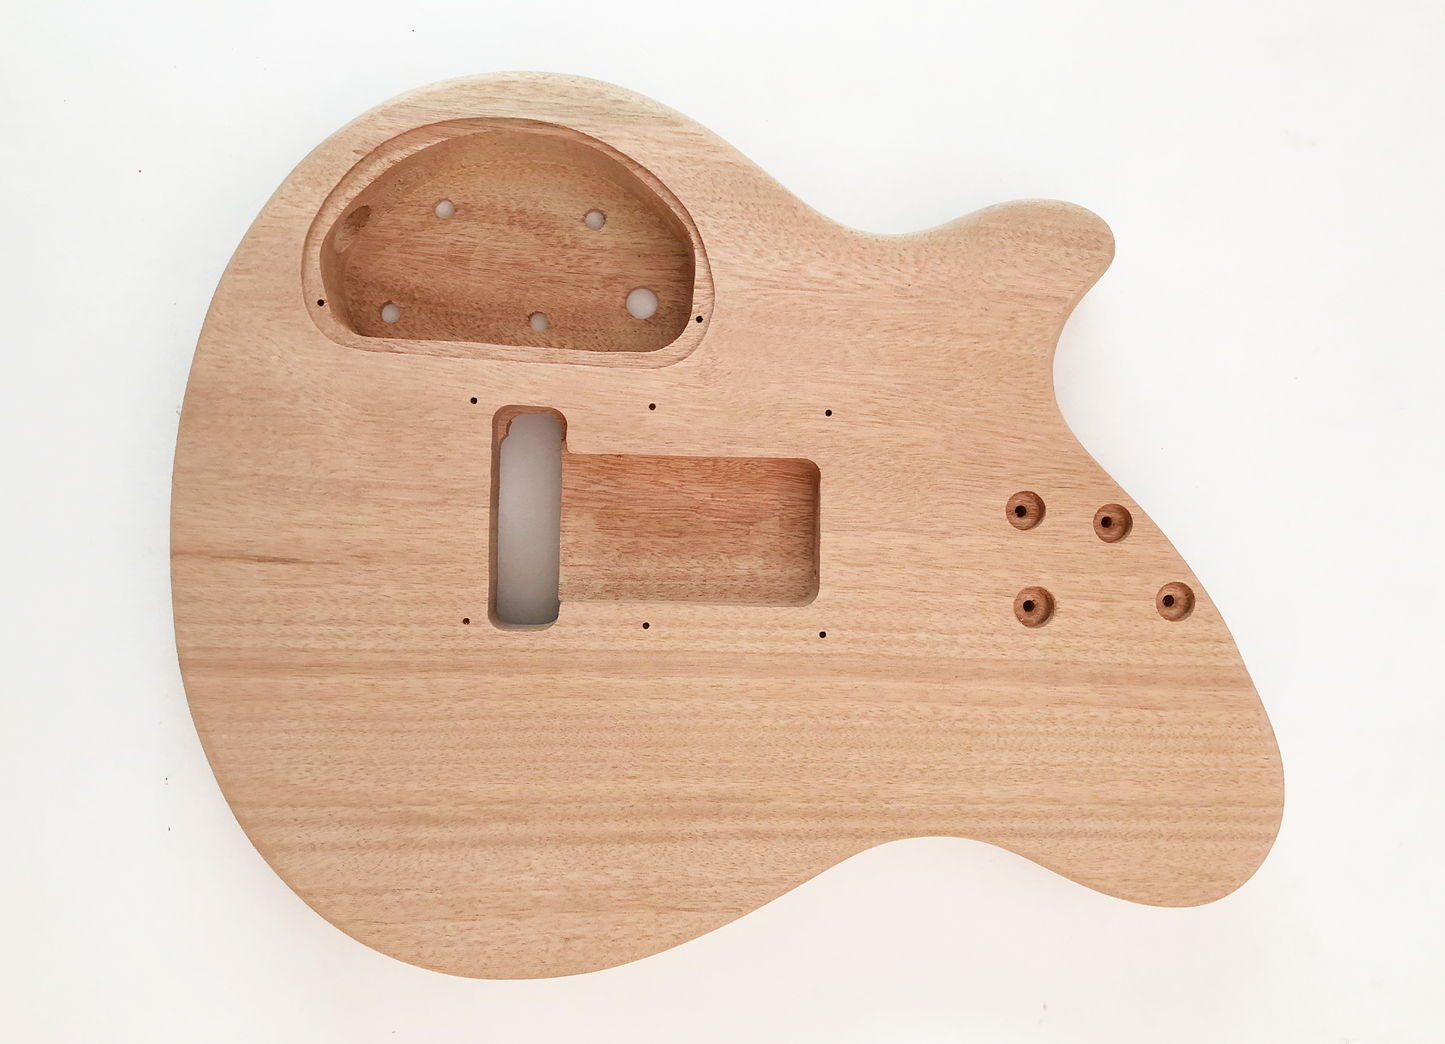 Wolf Style Build Your Own Guitar Kit